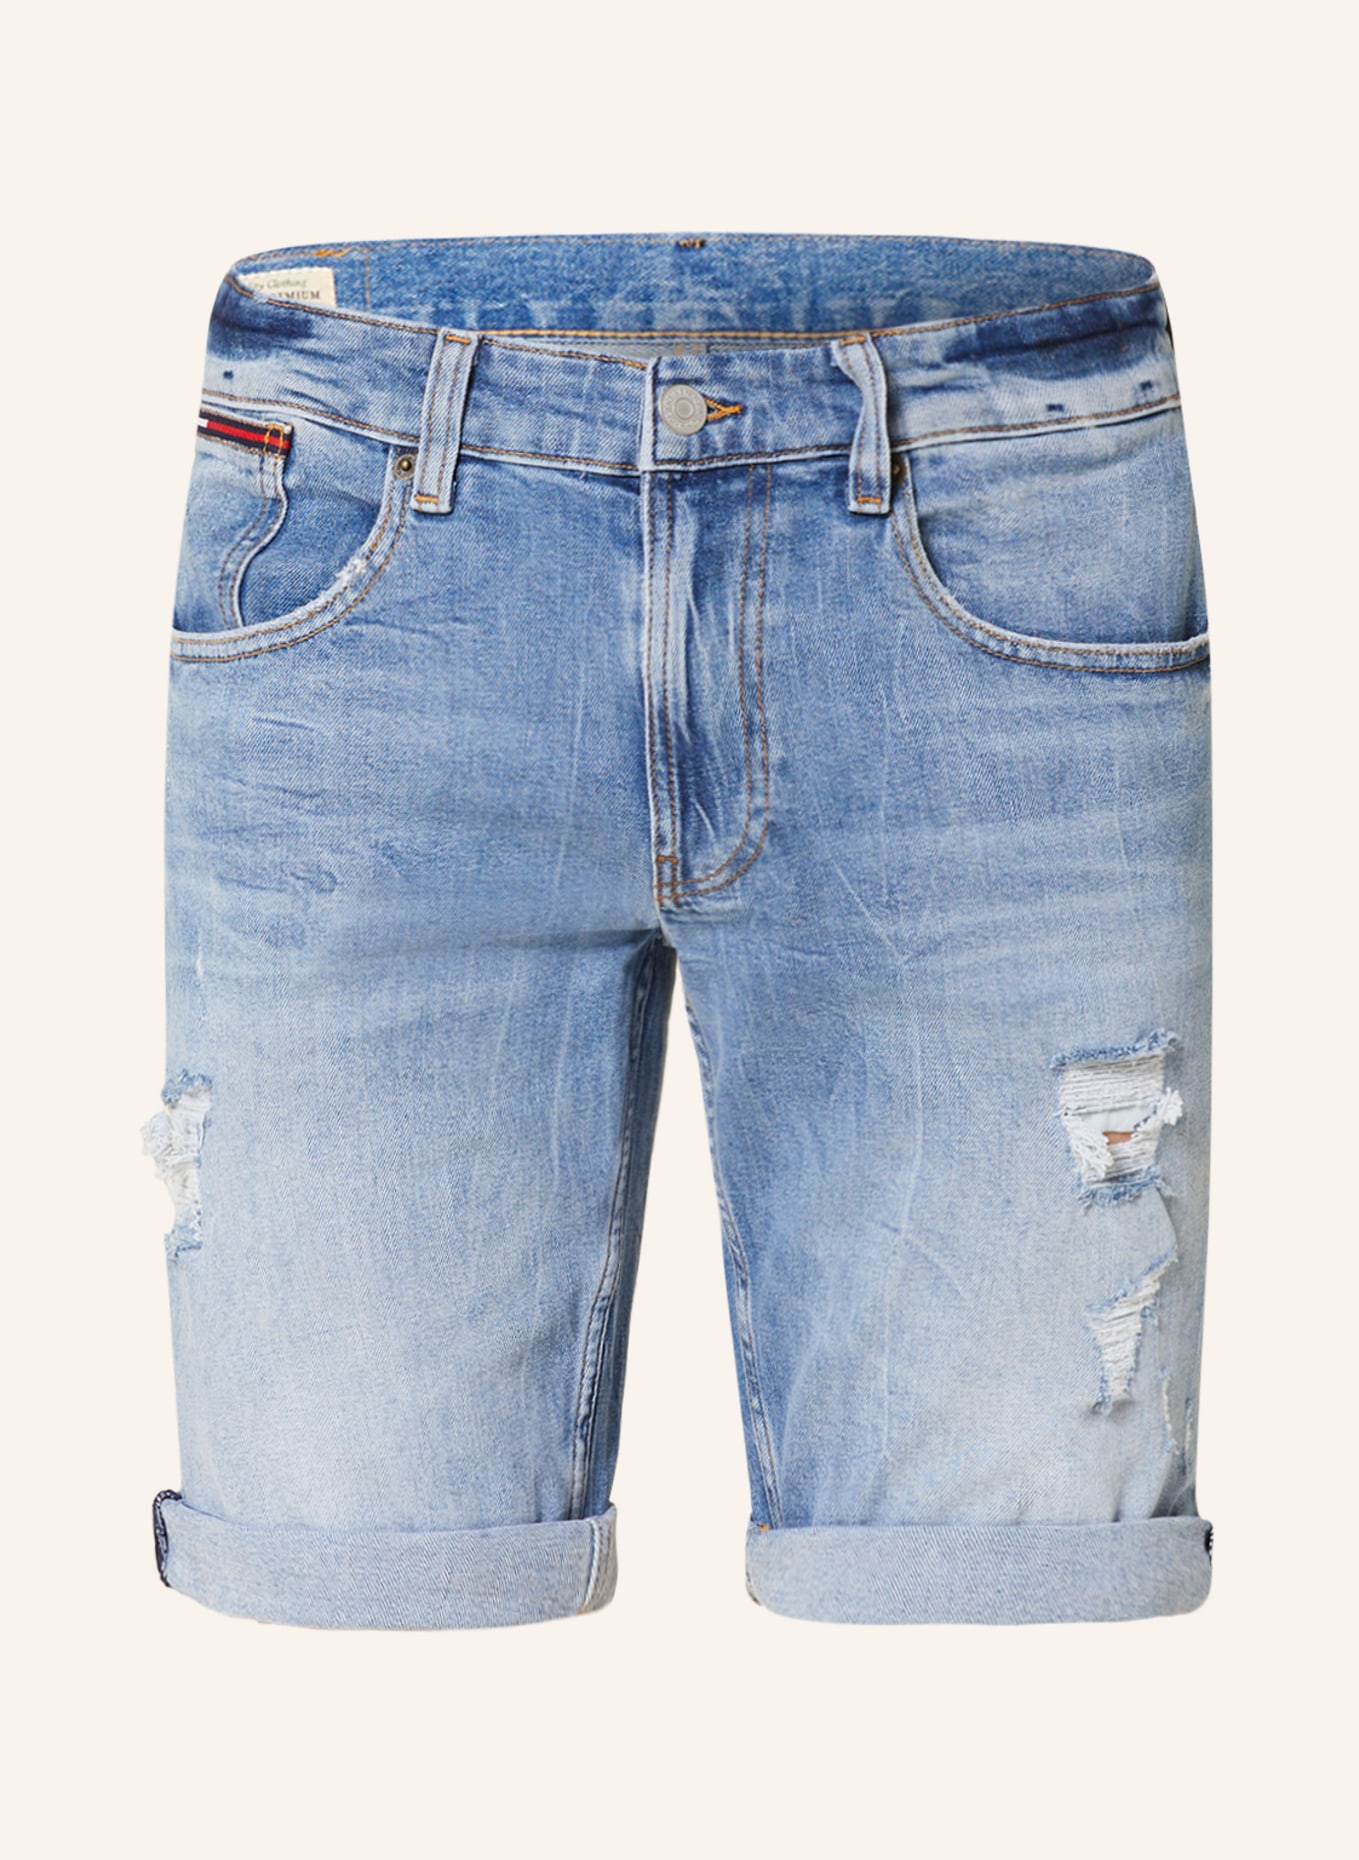 TOMMY JEANS Jeansshorts RONNIE Relaxed Fit, Farbe: 1A5 Denim Medium(Bild null)